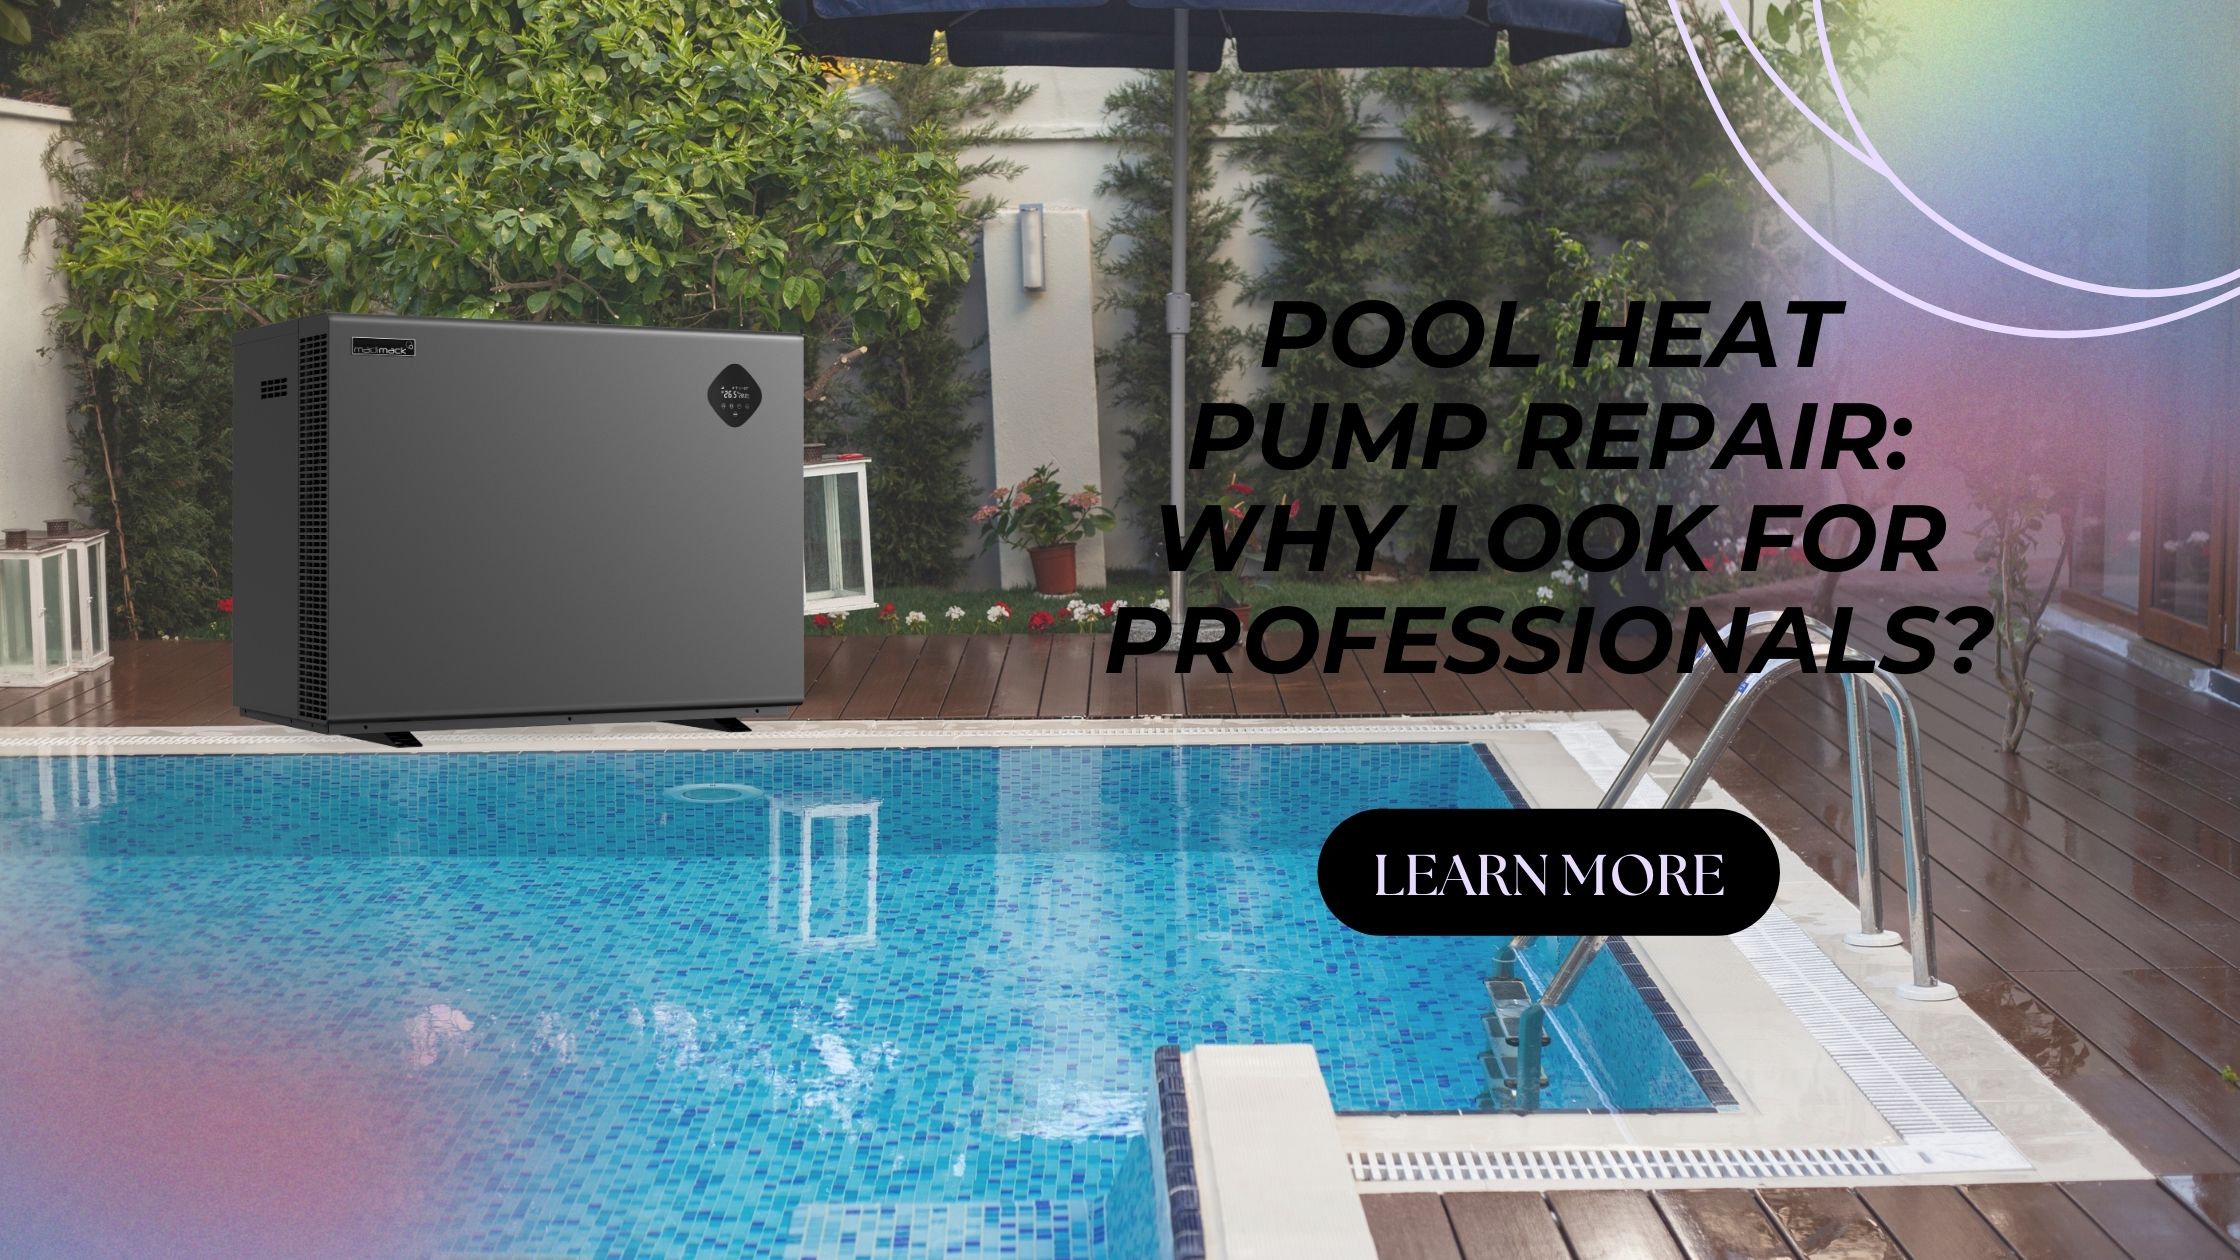 Pool Heat Pump Repair Melbourne: Why Look For Professionals? - WriteUpCafe.com